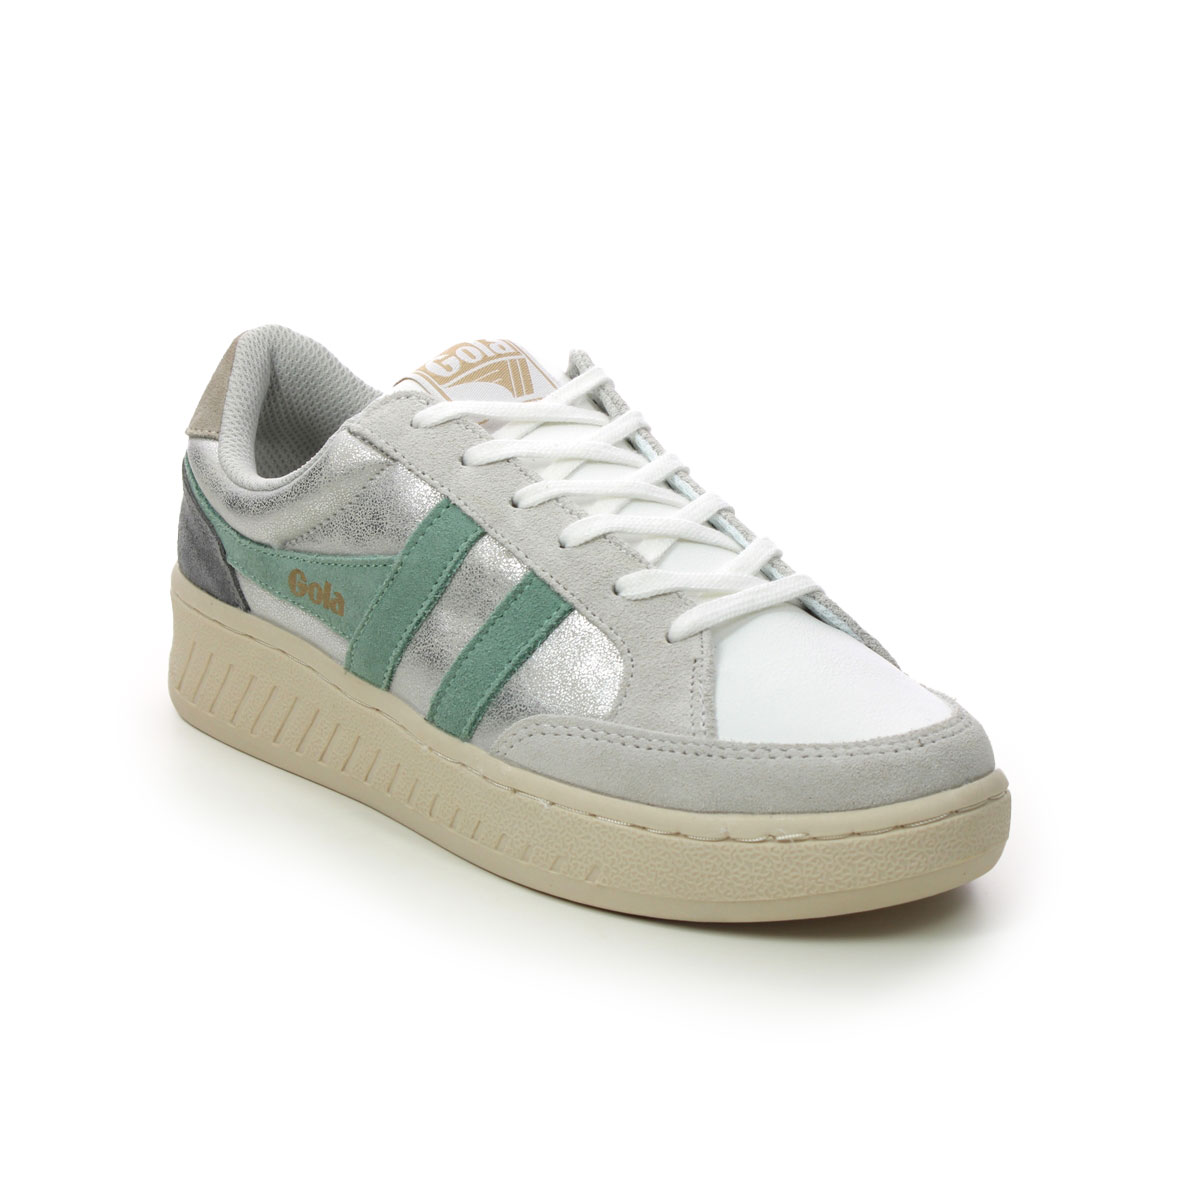 Gola Grandslam W Silver multi Womens trainers CLB334-JN in a Plain Leather in Size 6